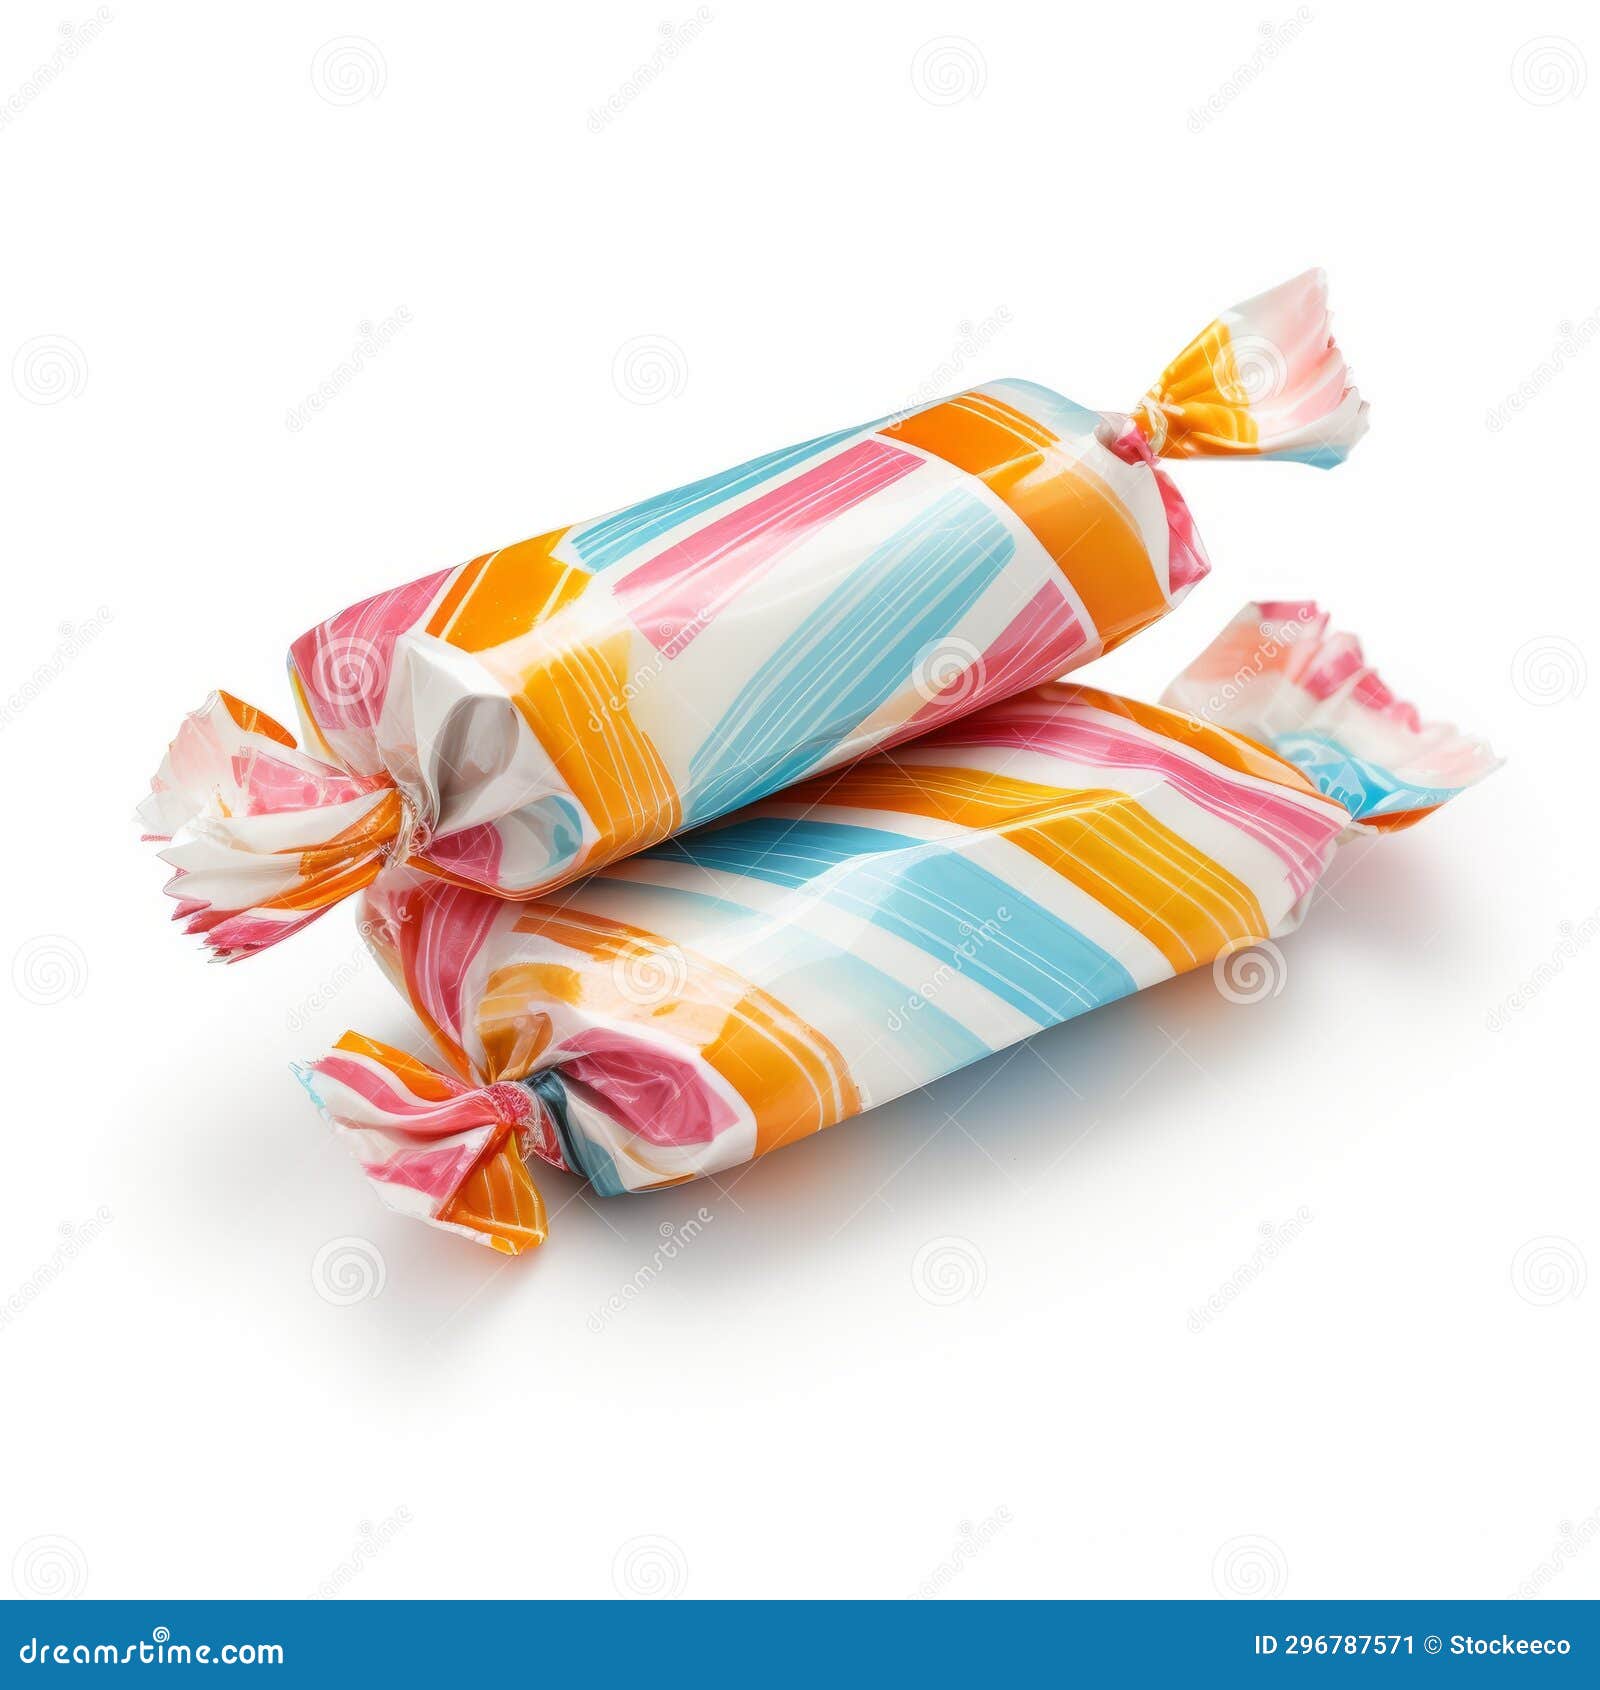 Colorful Candy Wrappers with Painterly Lines - High Resolution Sweets ...